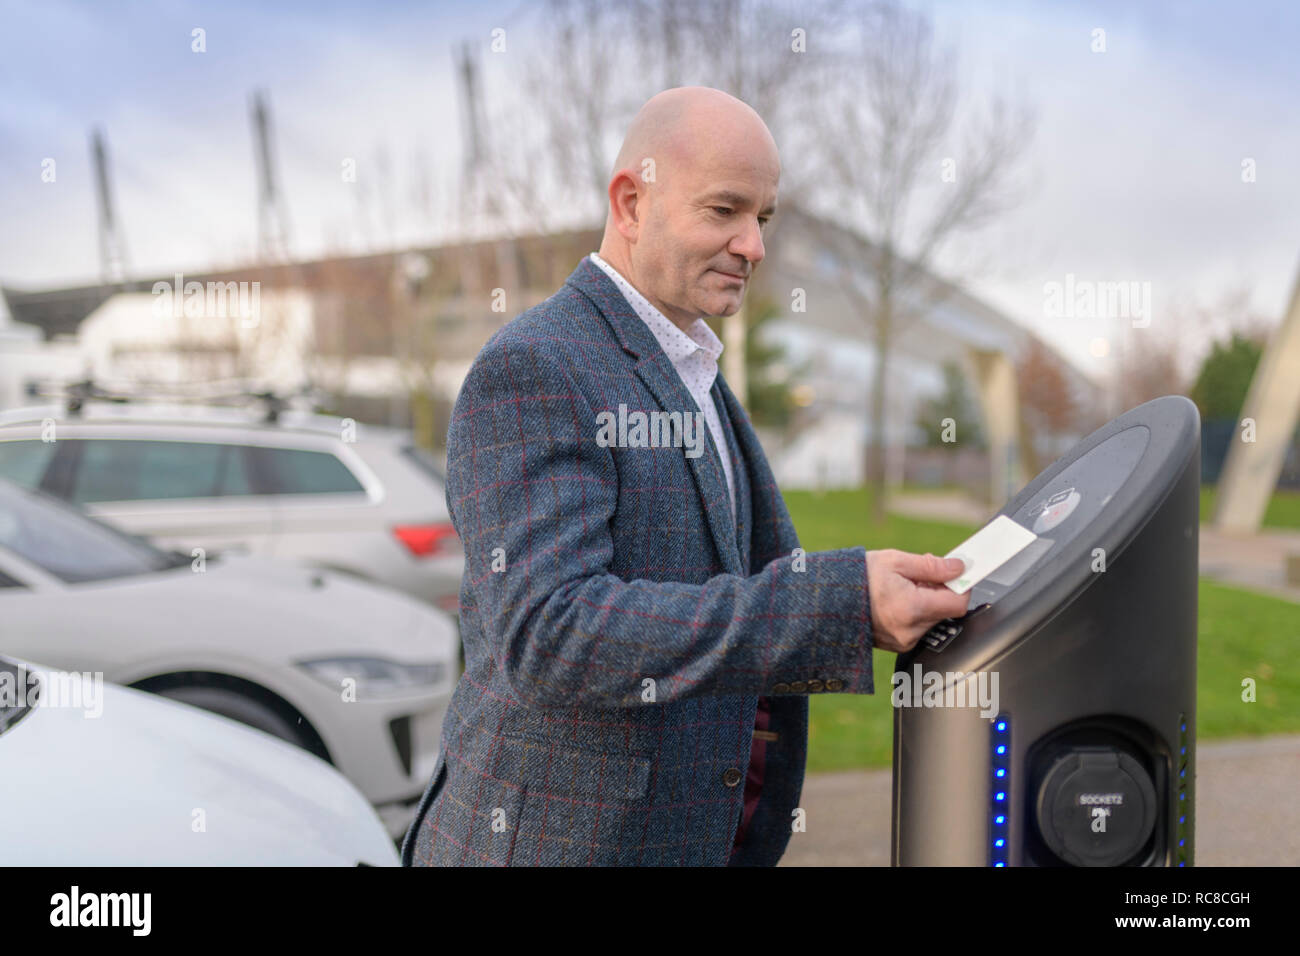 Businessman using access card at electric car charging point, Manchester, UK Stock Photo